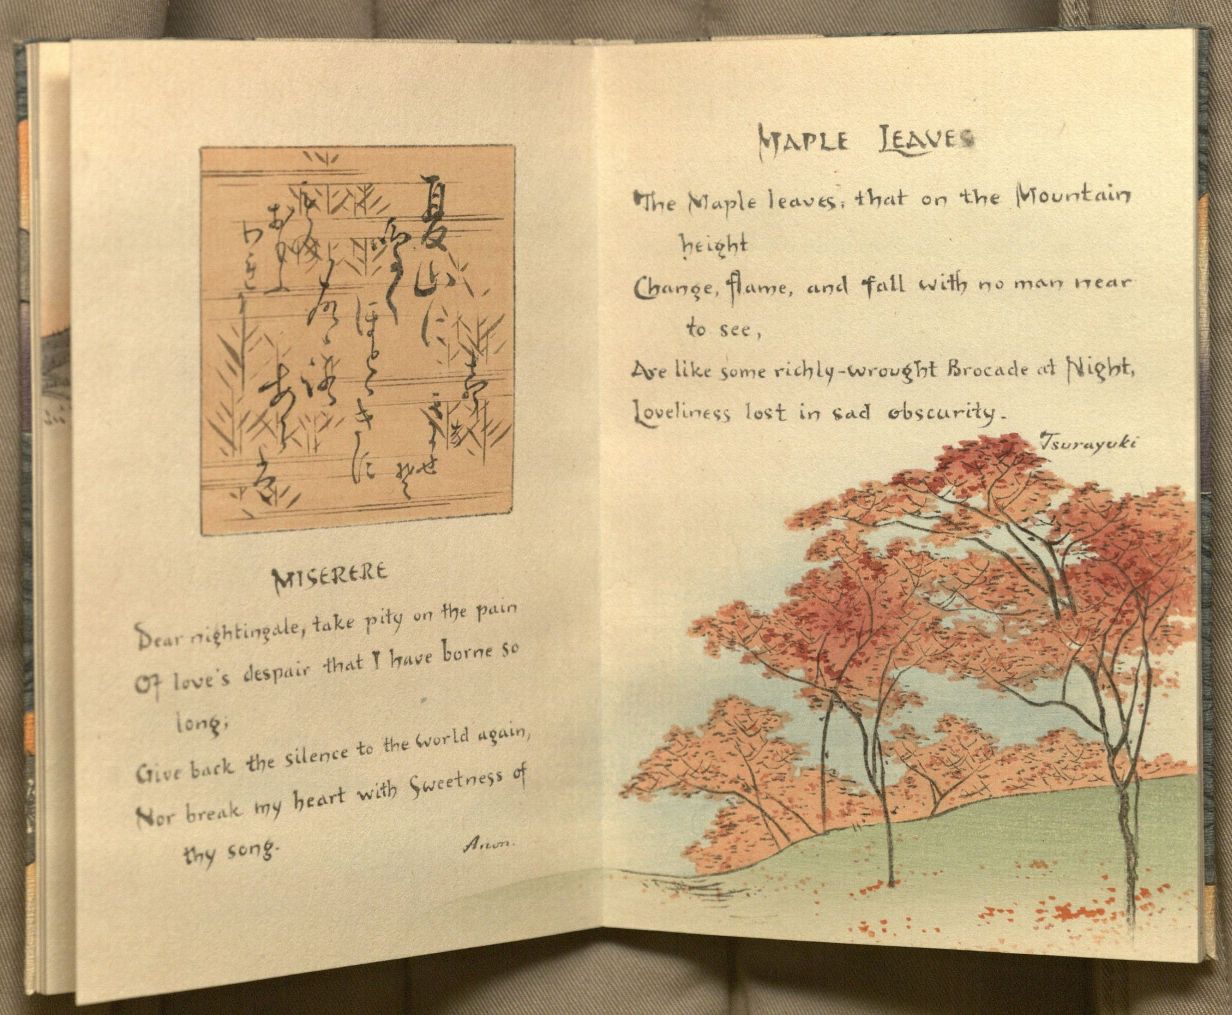 Image of opening for the poems "misere" and "Maple Leaves" from volume 1 of Sword and Blossom Poems